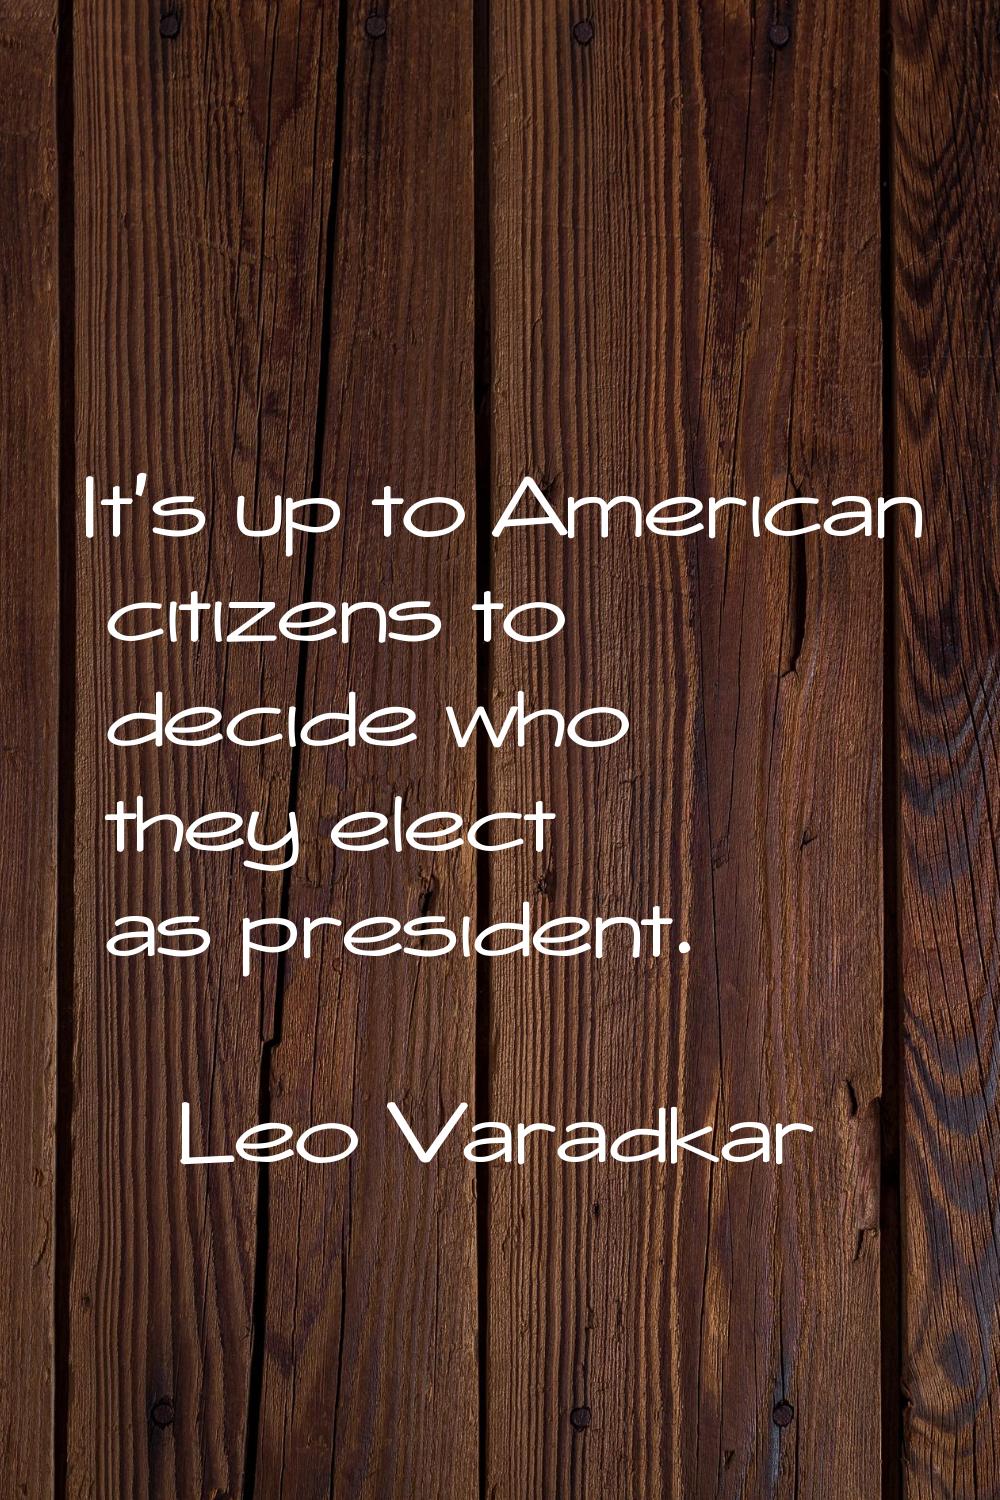 It's up to American citizens to decide who they elect as president.